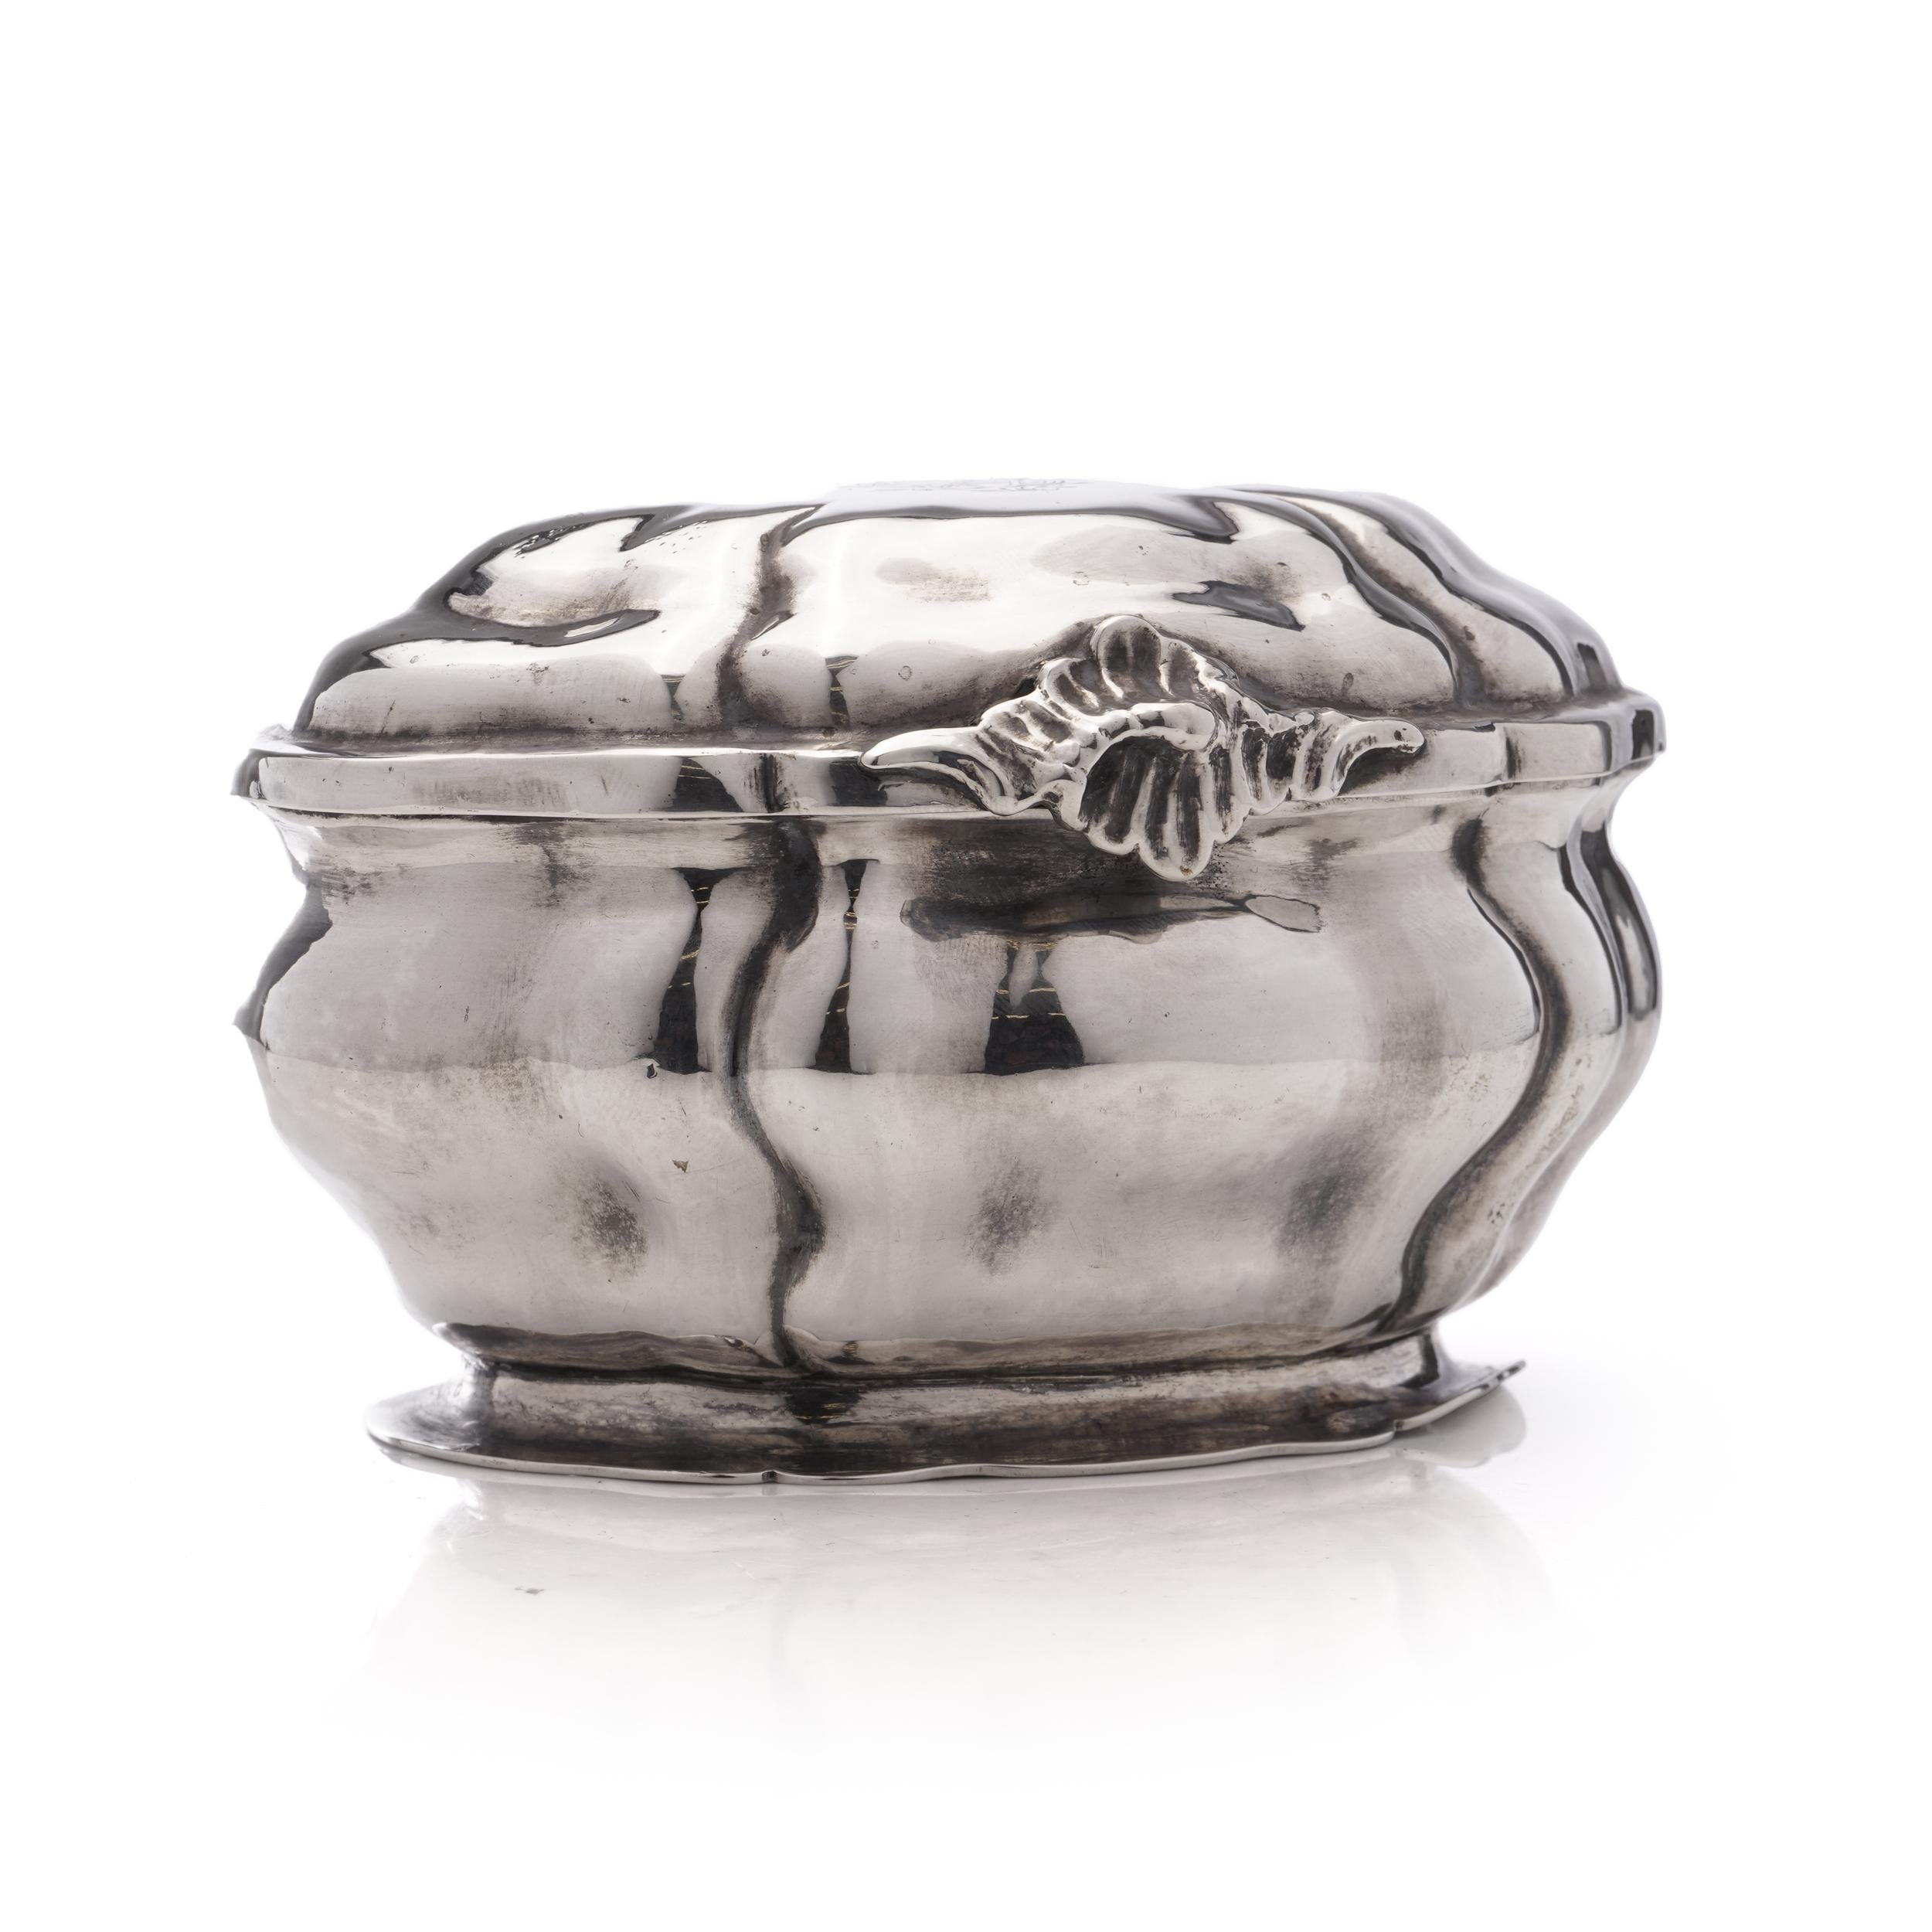 Antique 19th century 800. German silver small oval Tea Caddy with Hanau marks For Sale 1